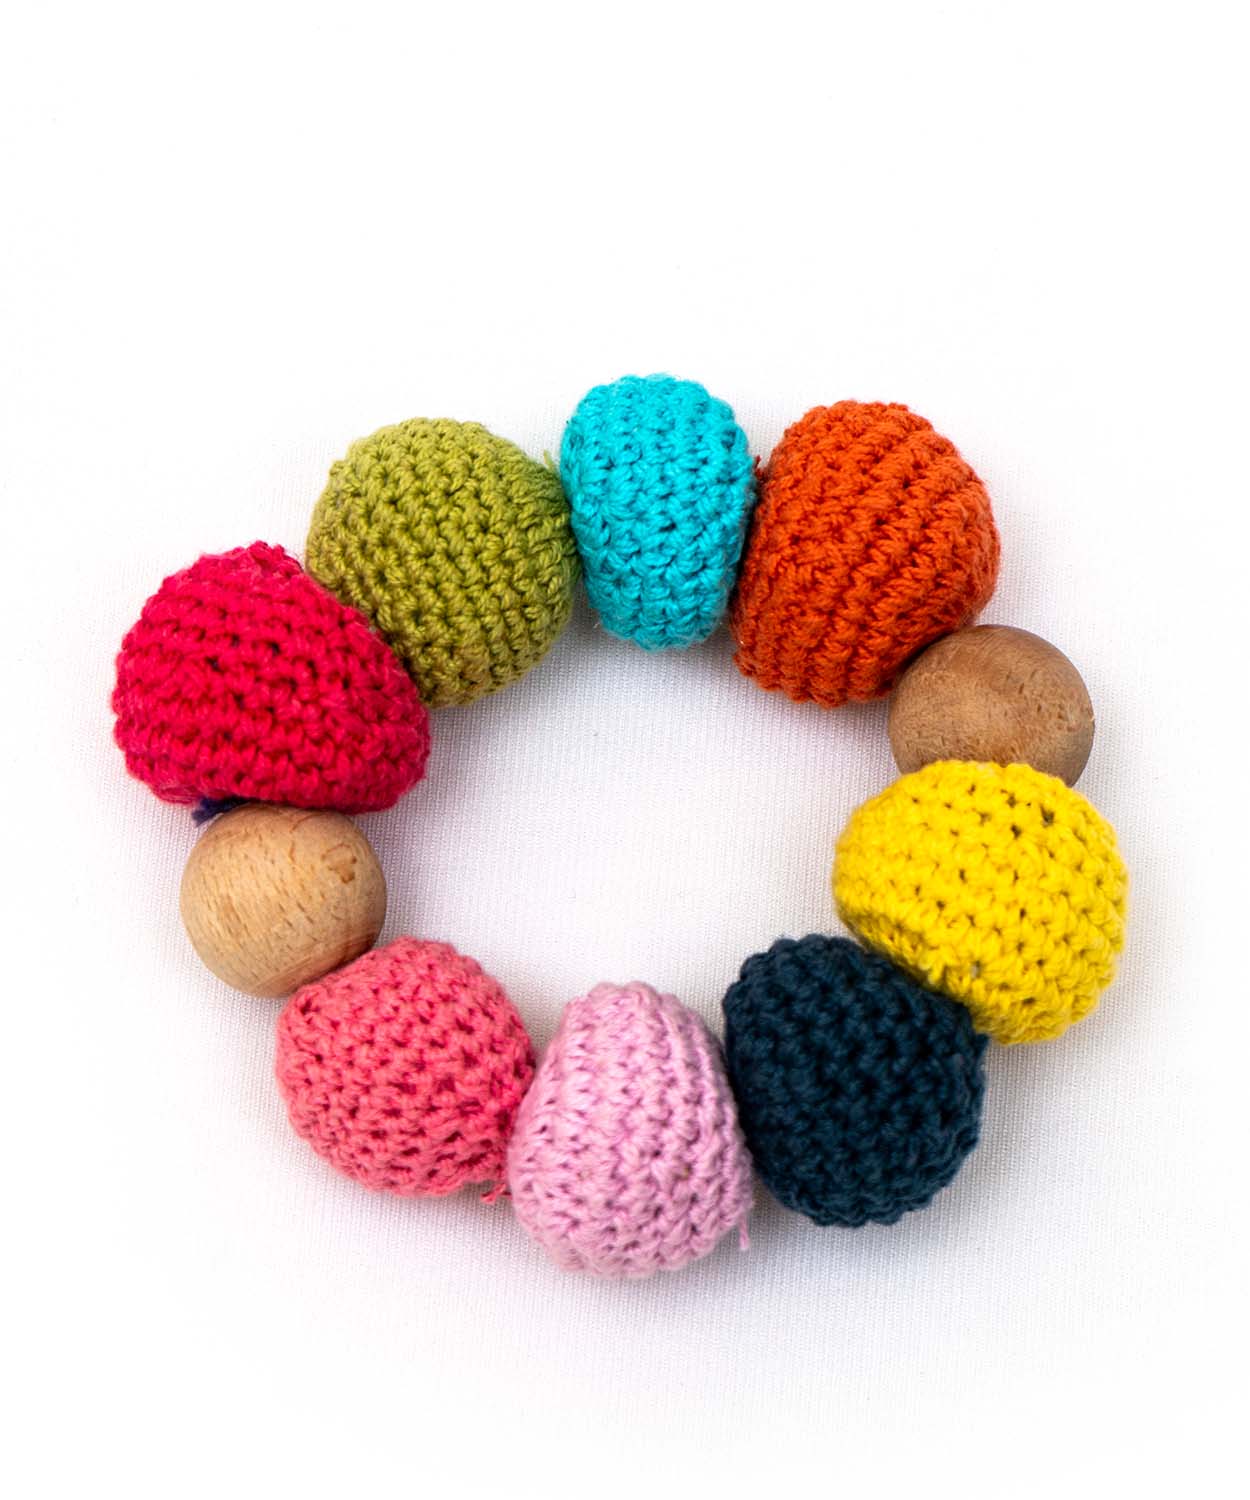 Colorful Crochet Balls Toy